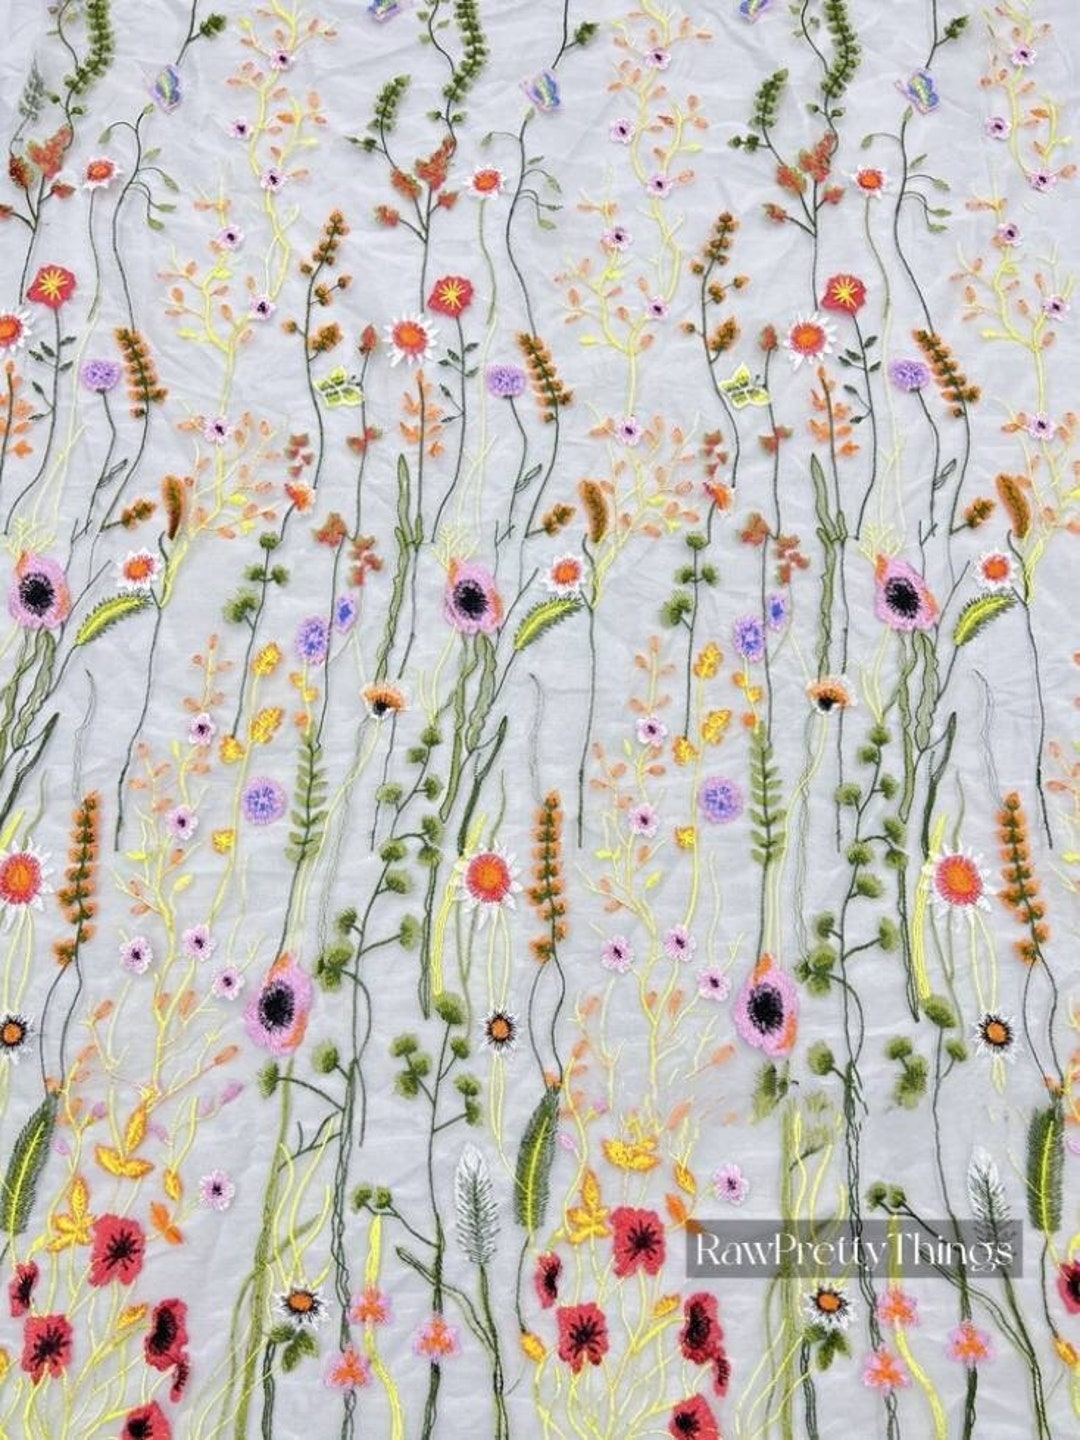 51” Width 100% Cotton 3D Floral Embroidery Cotton Fabric by the